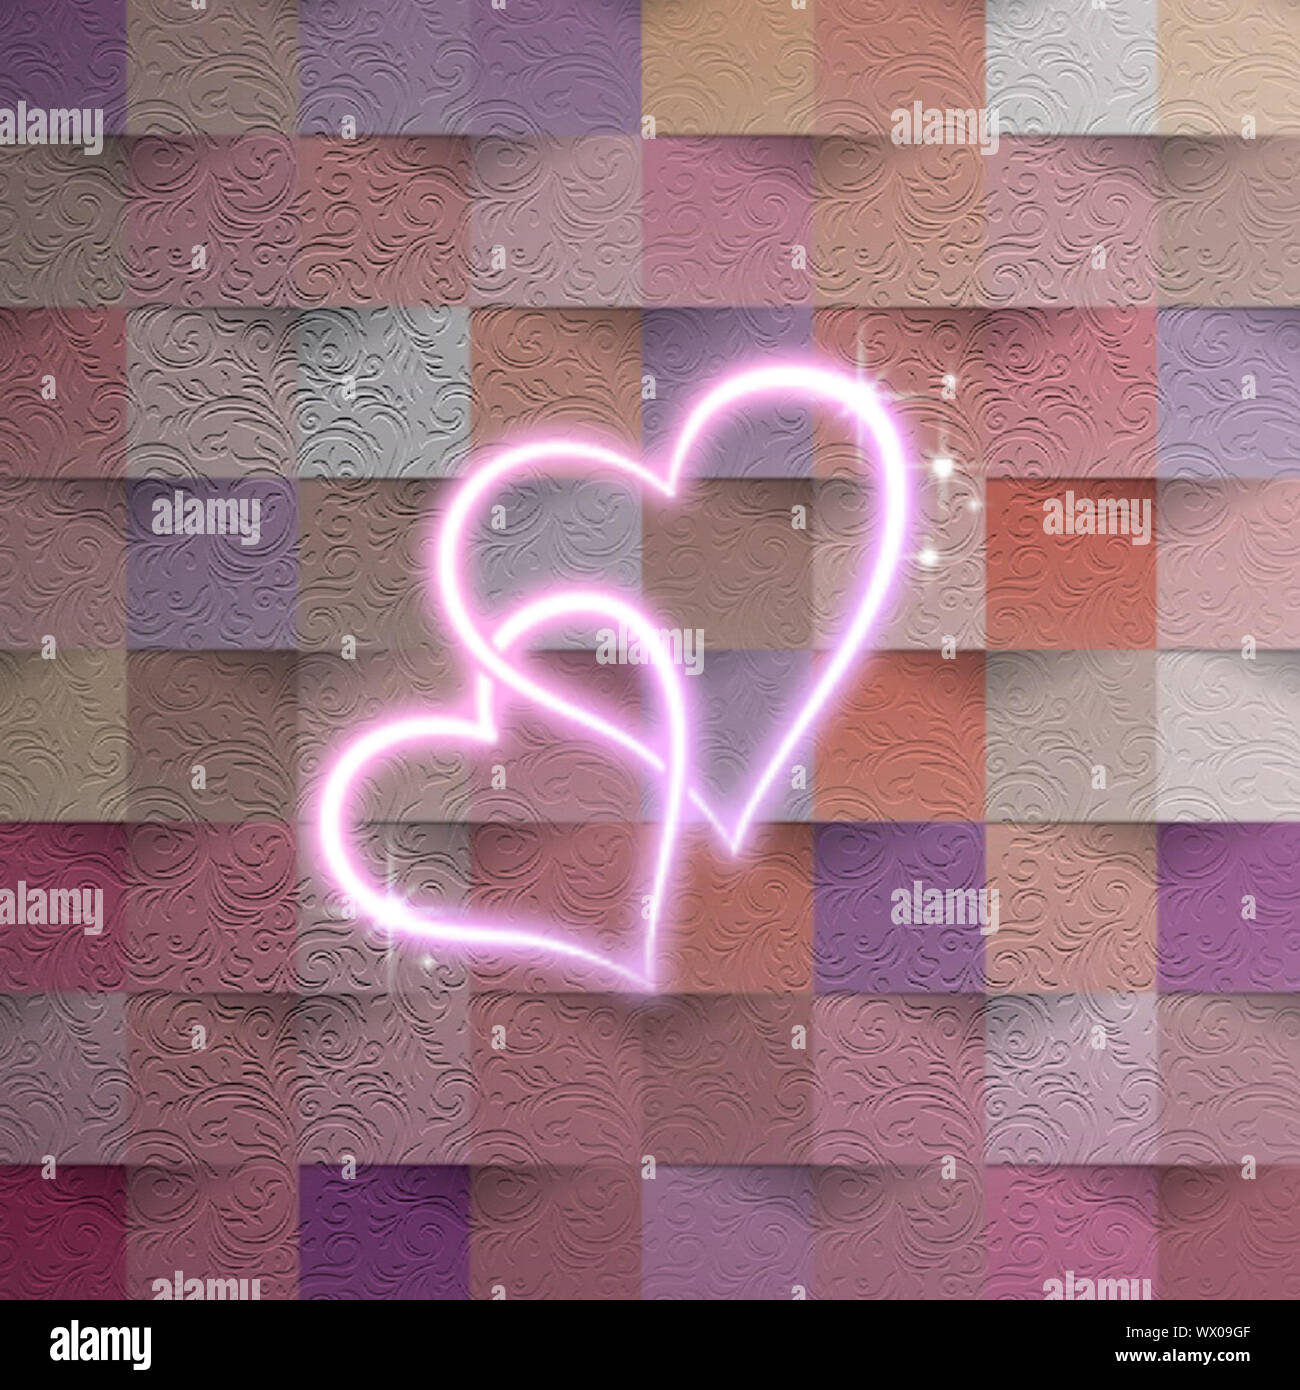 Neon Love Shapes On Colorful Abstract Background, Best use as valentine  card design or any kind of romantic Wallpaper Stock Photo - Alamy